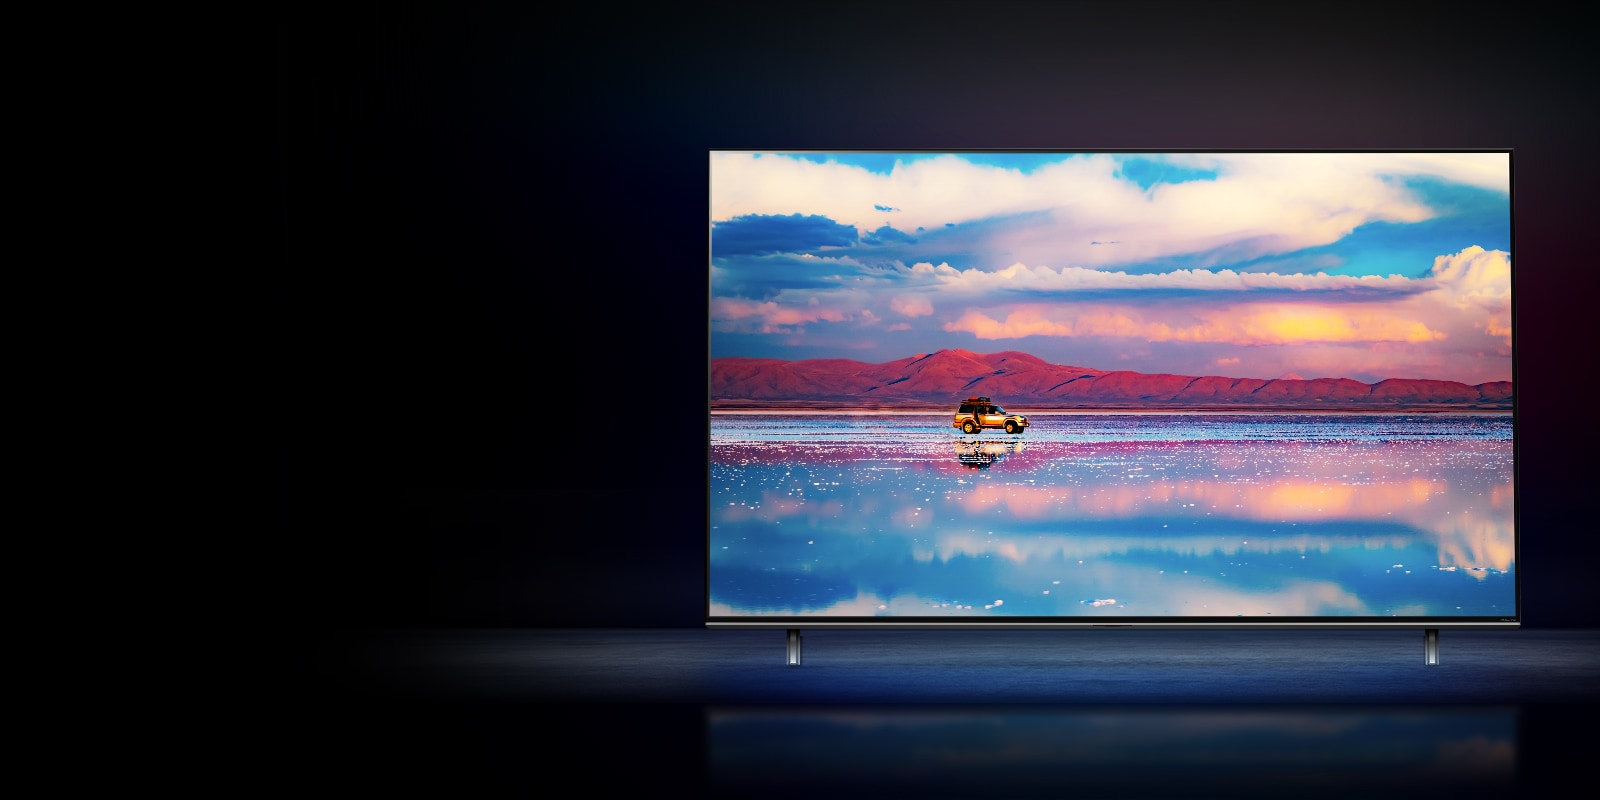 An LG NanoCell TV against a black background. The TV shows a car driving in front of a low mountain range in water that reflects the vivid sky.